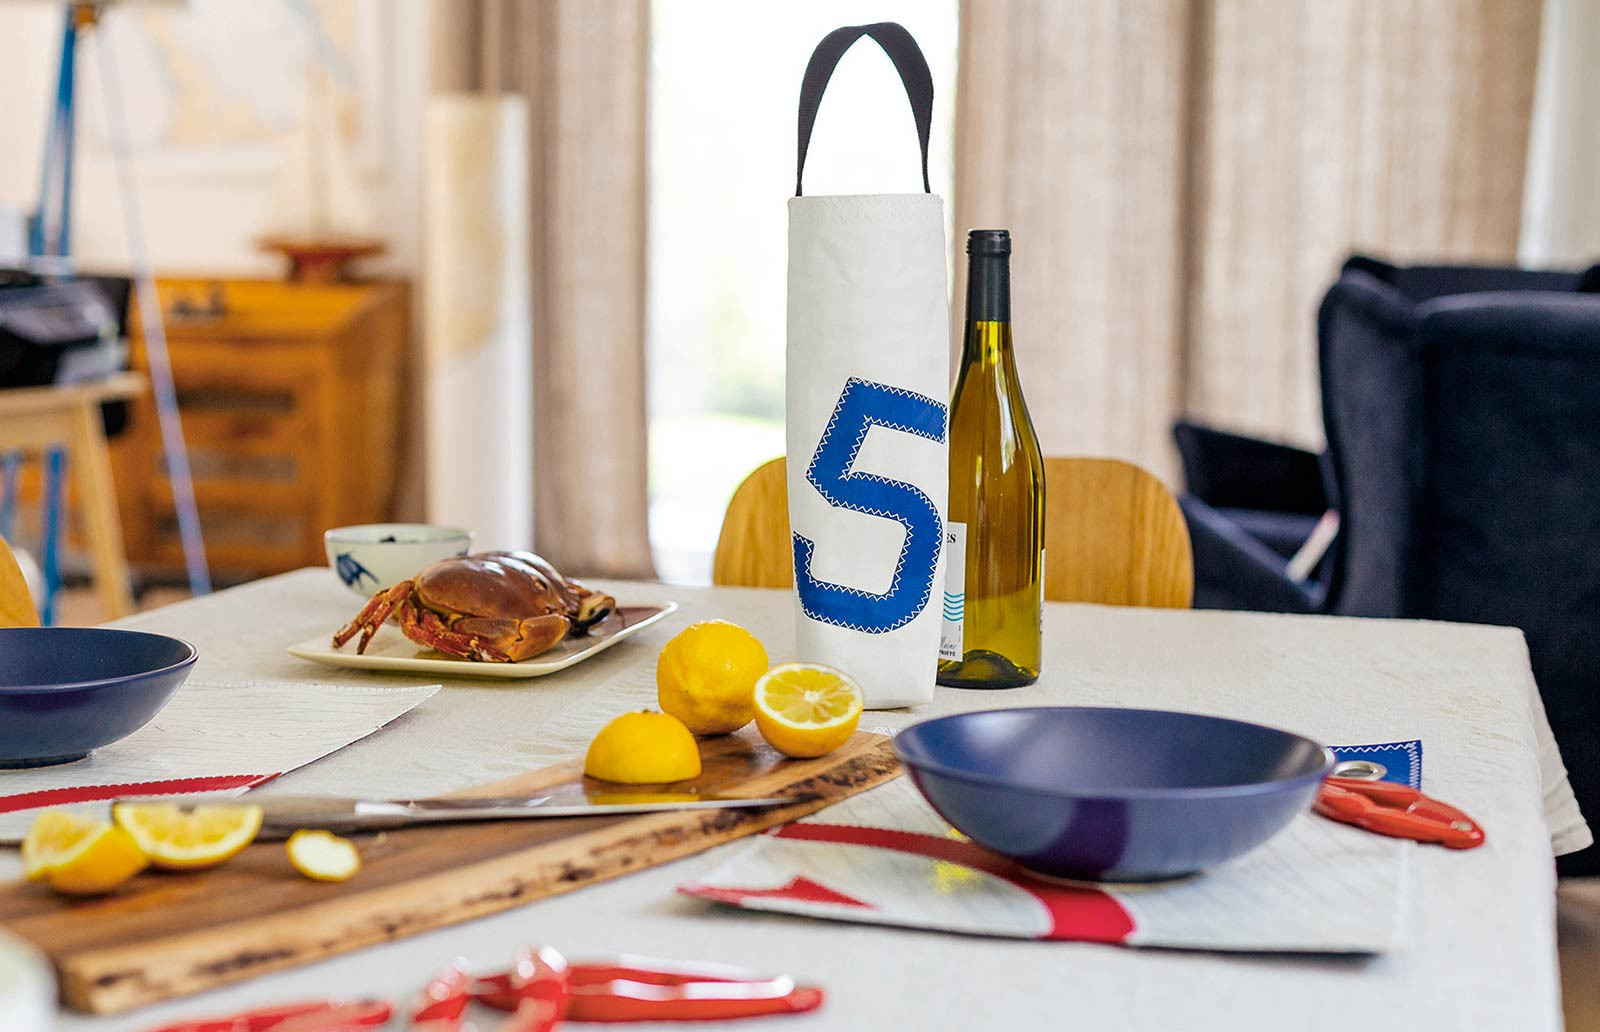 Dinner is served: apron, place mat | 727 Sailbags